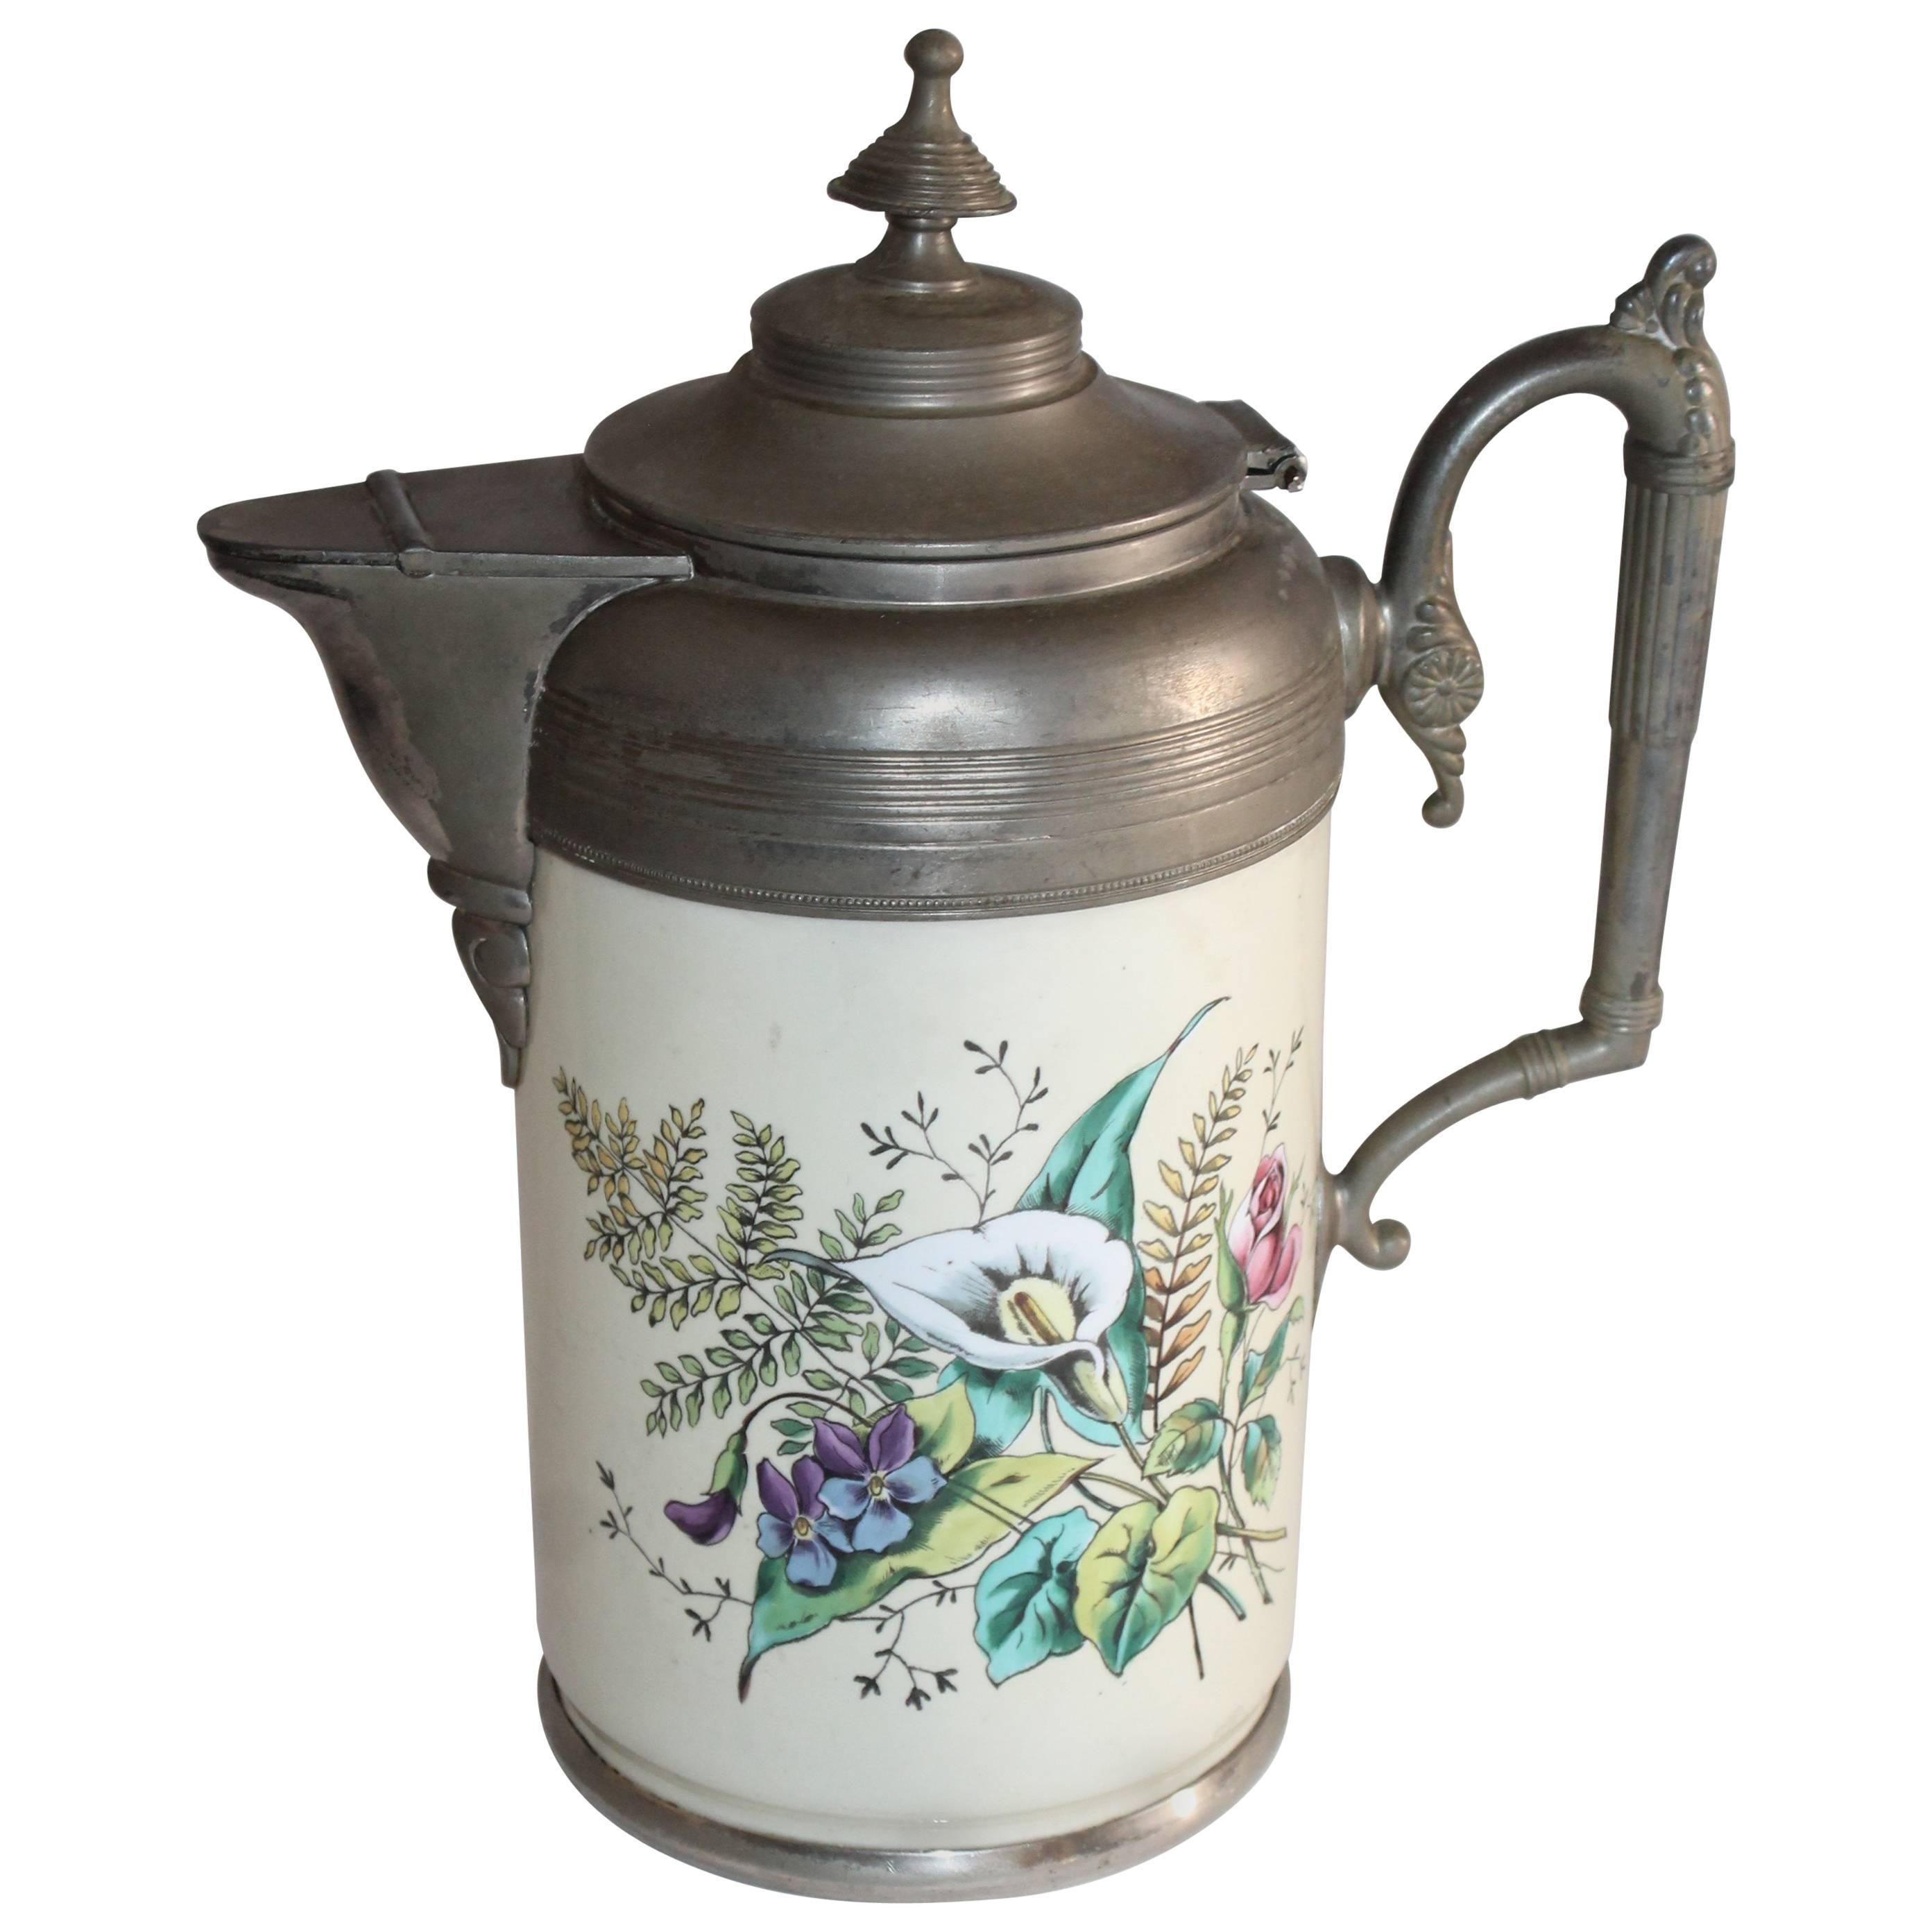 Rare Early 19th Century Enamel Decorated Pewter Coffee Pot For Sale